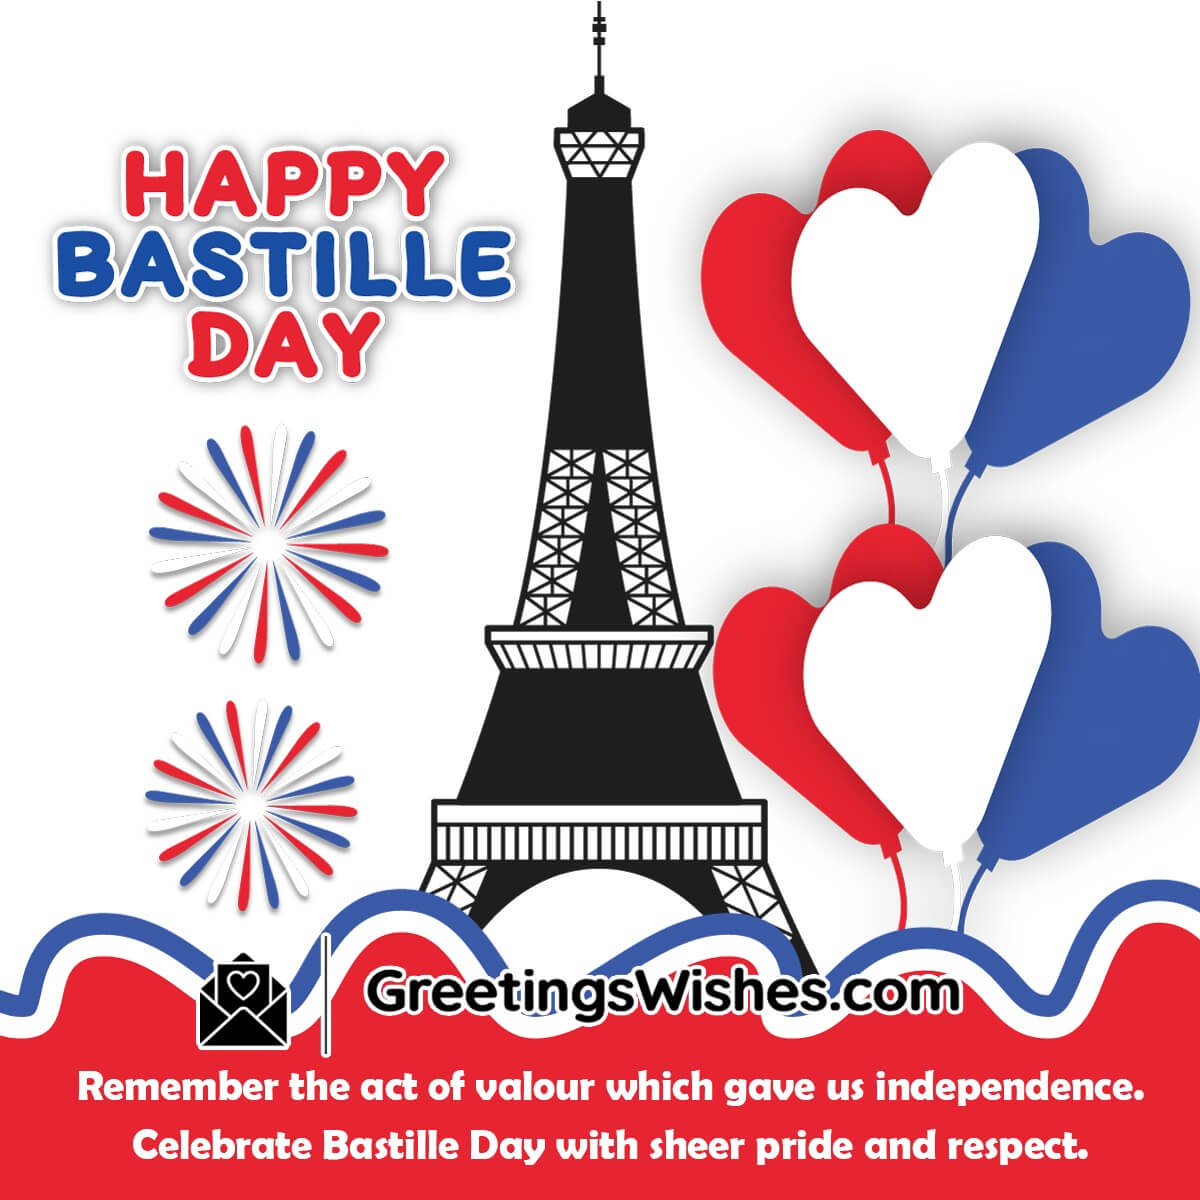 Happy Bastille Day Greetings